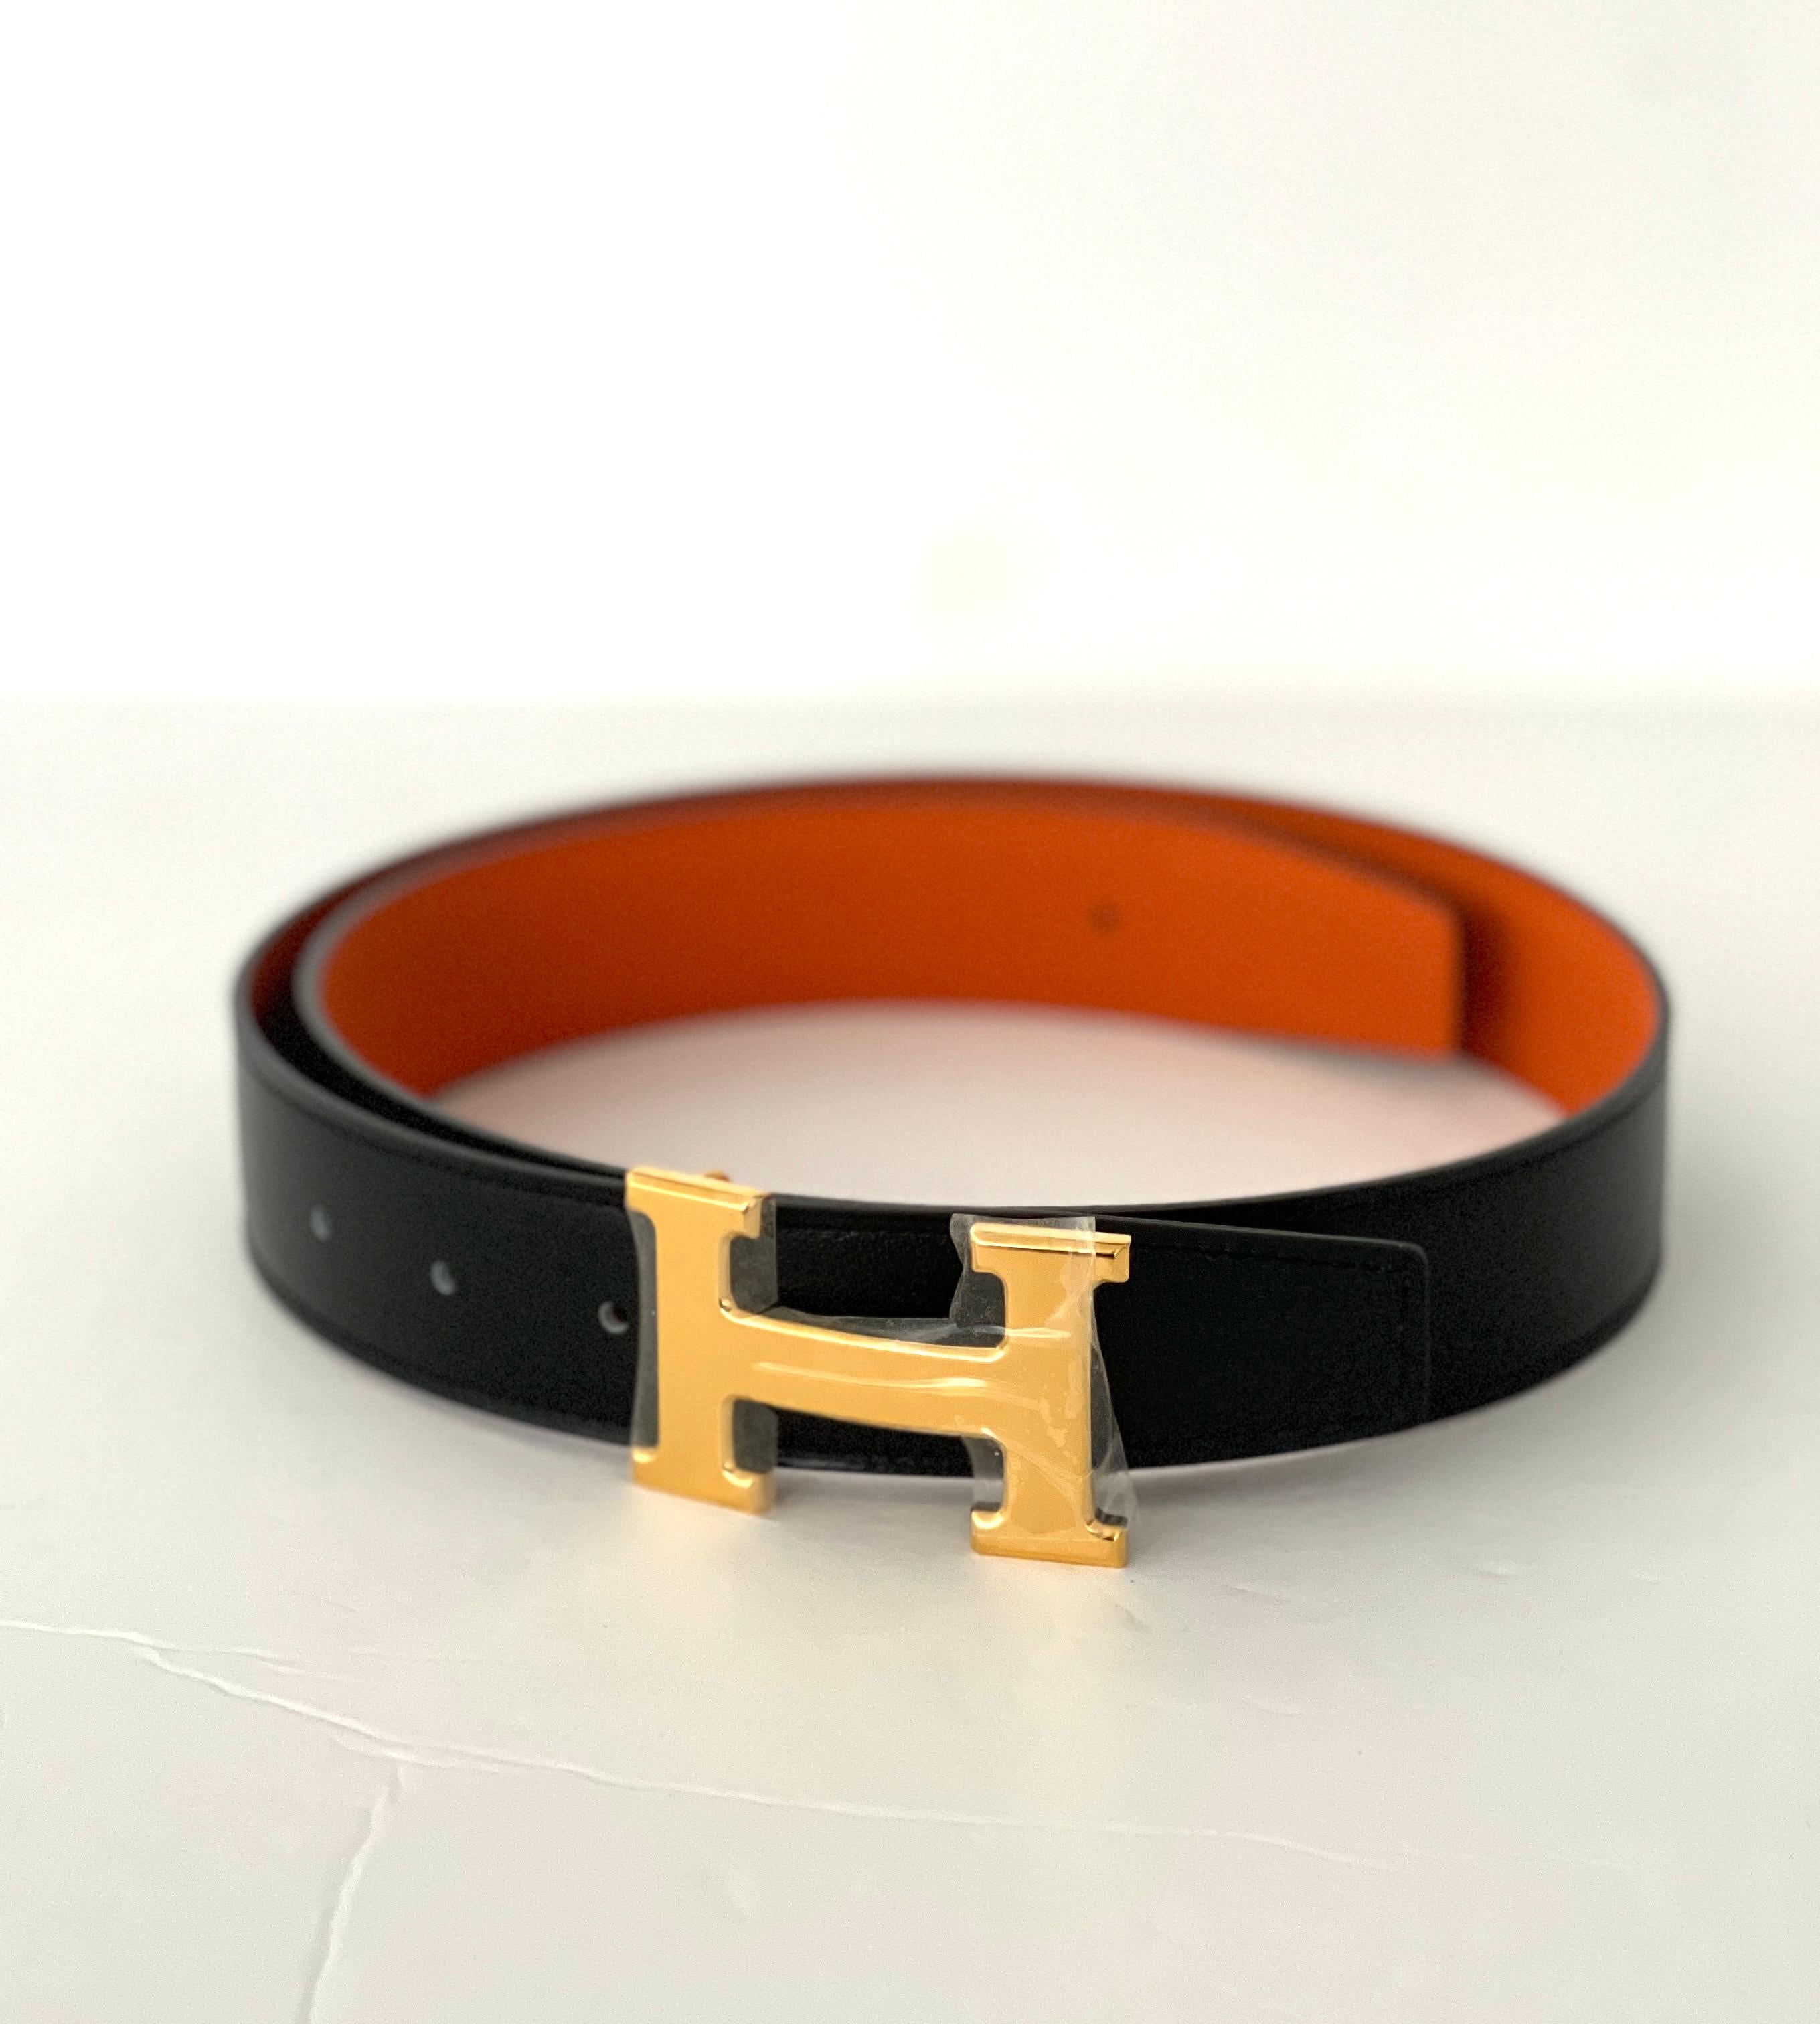 H belt buckle & Reversible leather strap 32 mm
Size is 80
Width is 1.3